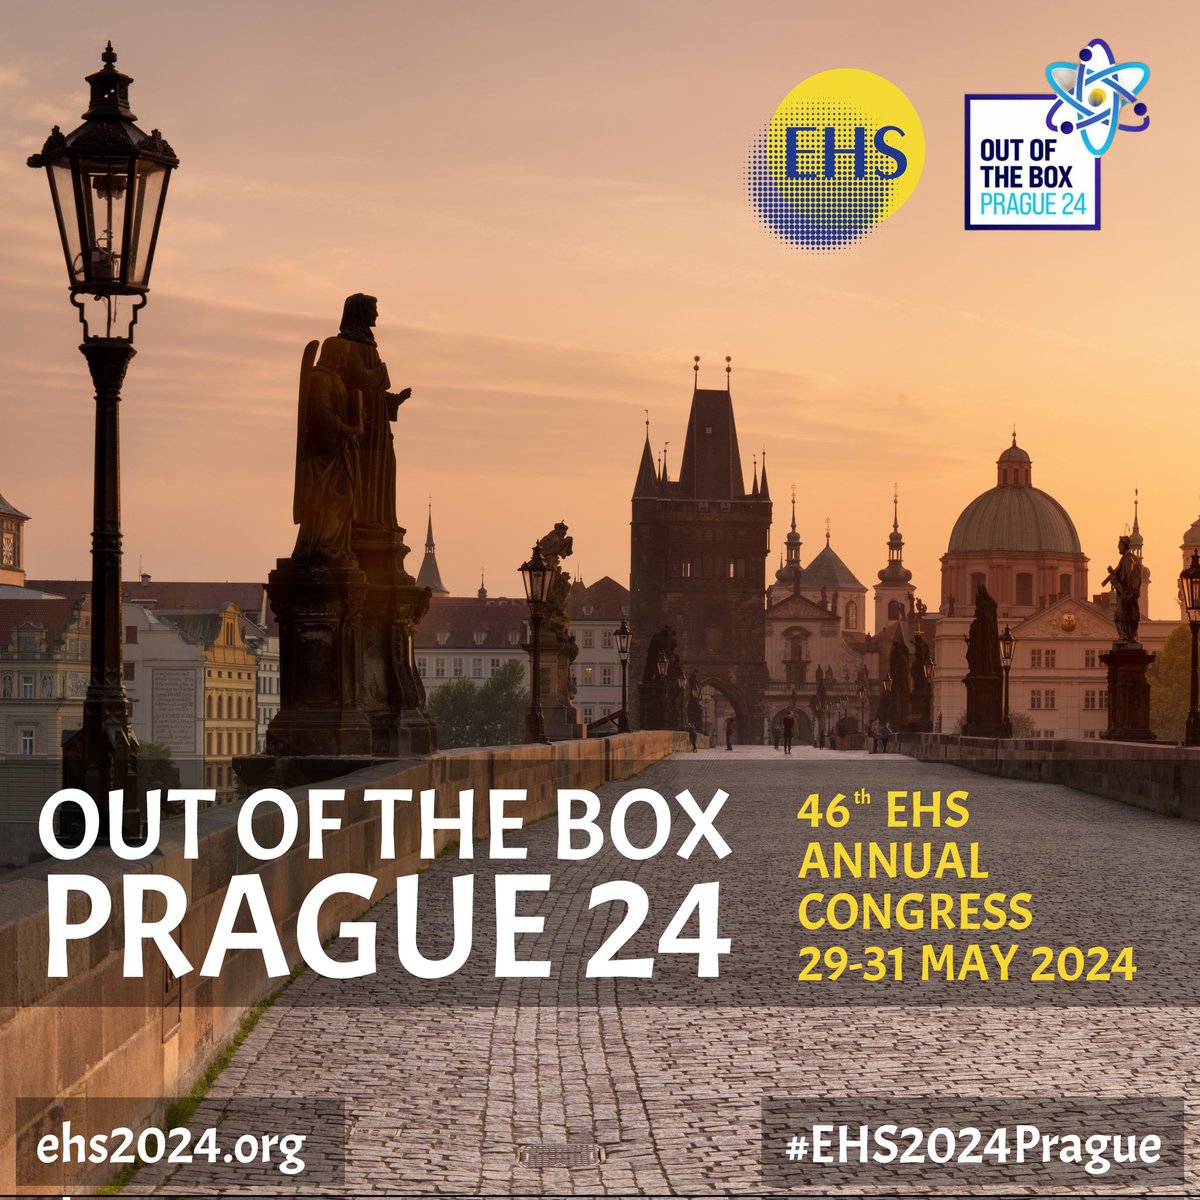 📣 We are excited to announce that the #EHS2024Prague has received accreditation from the @EACCME® - European Accreditation Council for Continuing Medical Education, granting 17 CME credits (ECMEC®s)! Join us for the EHS 2024 congress and take part in the engaging sessions,